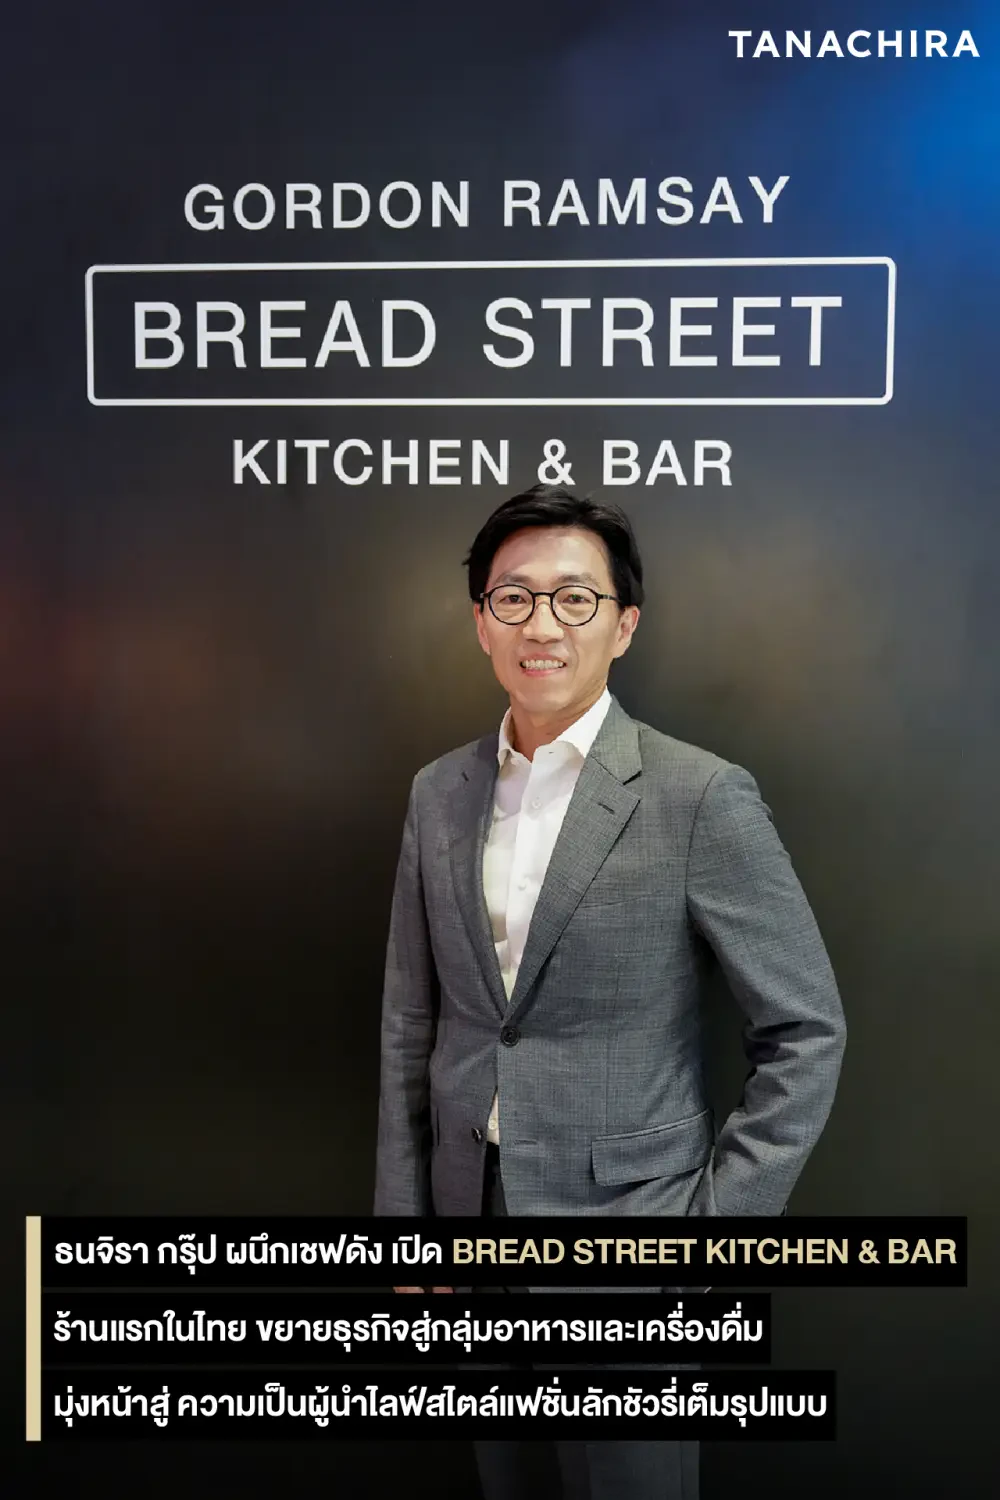 FROM LONDON TO BANGKOK. THE HIGHLY ANTICIPATED GORDON RAMSAY’S BREAD STREET KITCHEN & BAR IS NOW OPEN